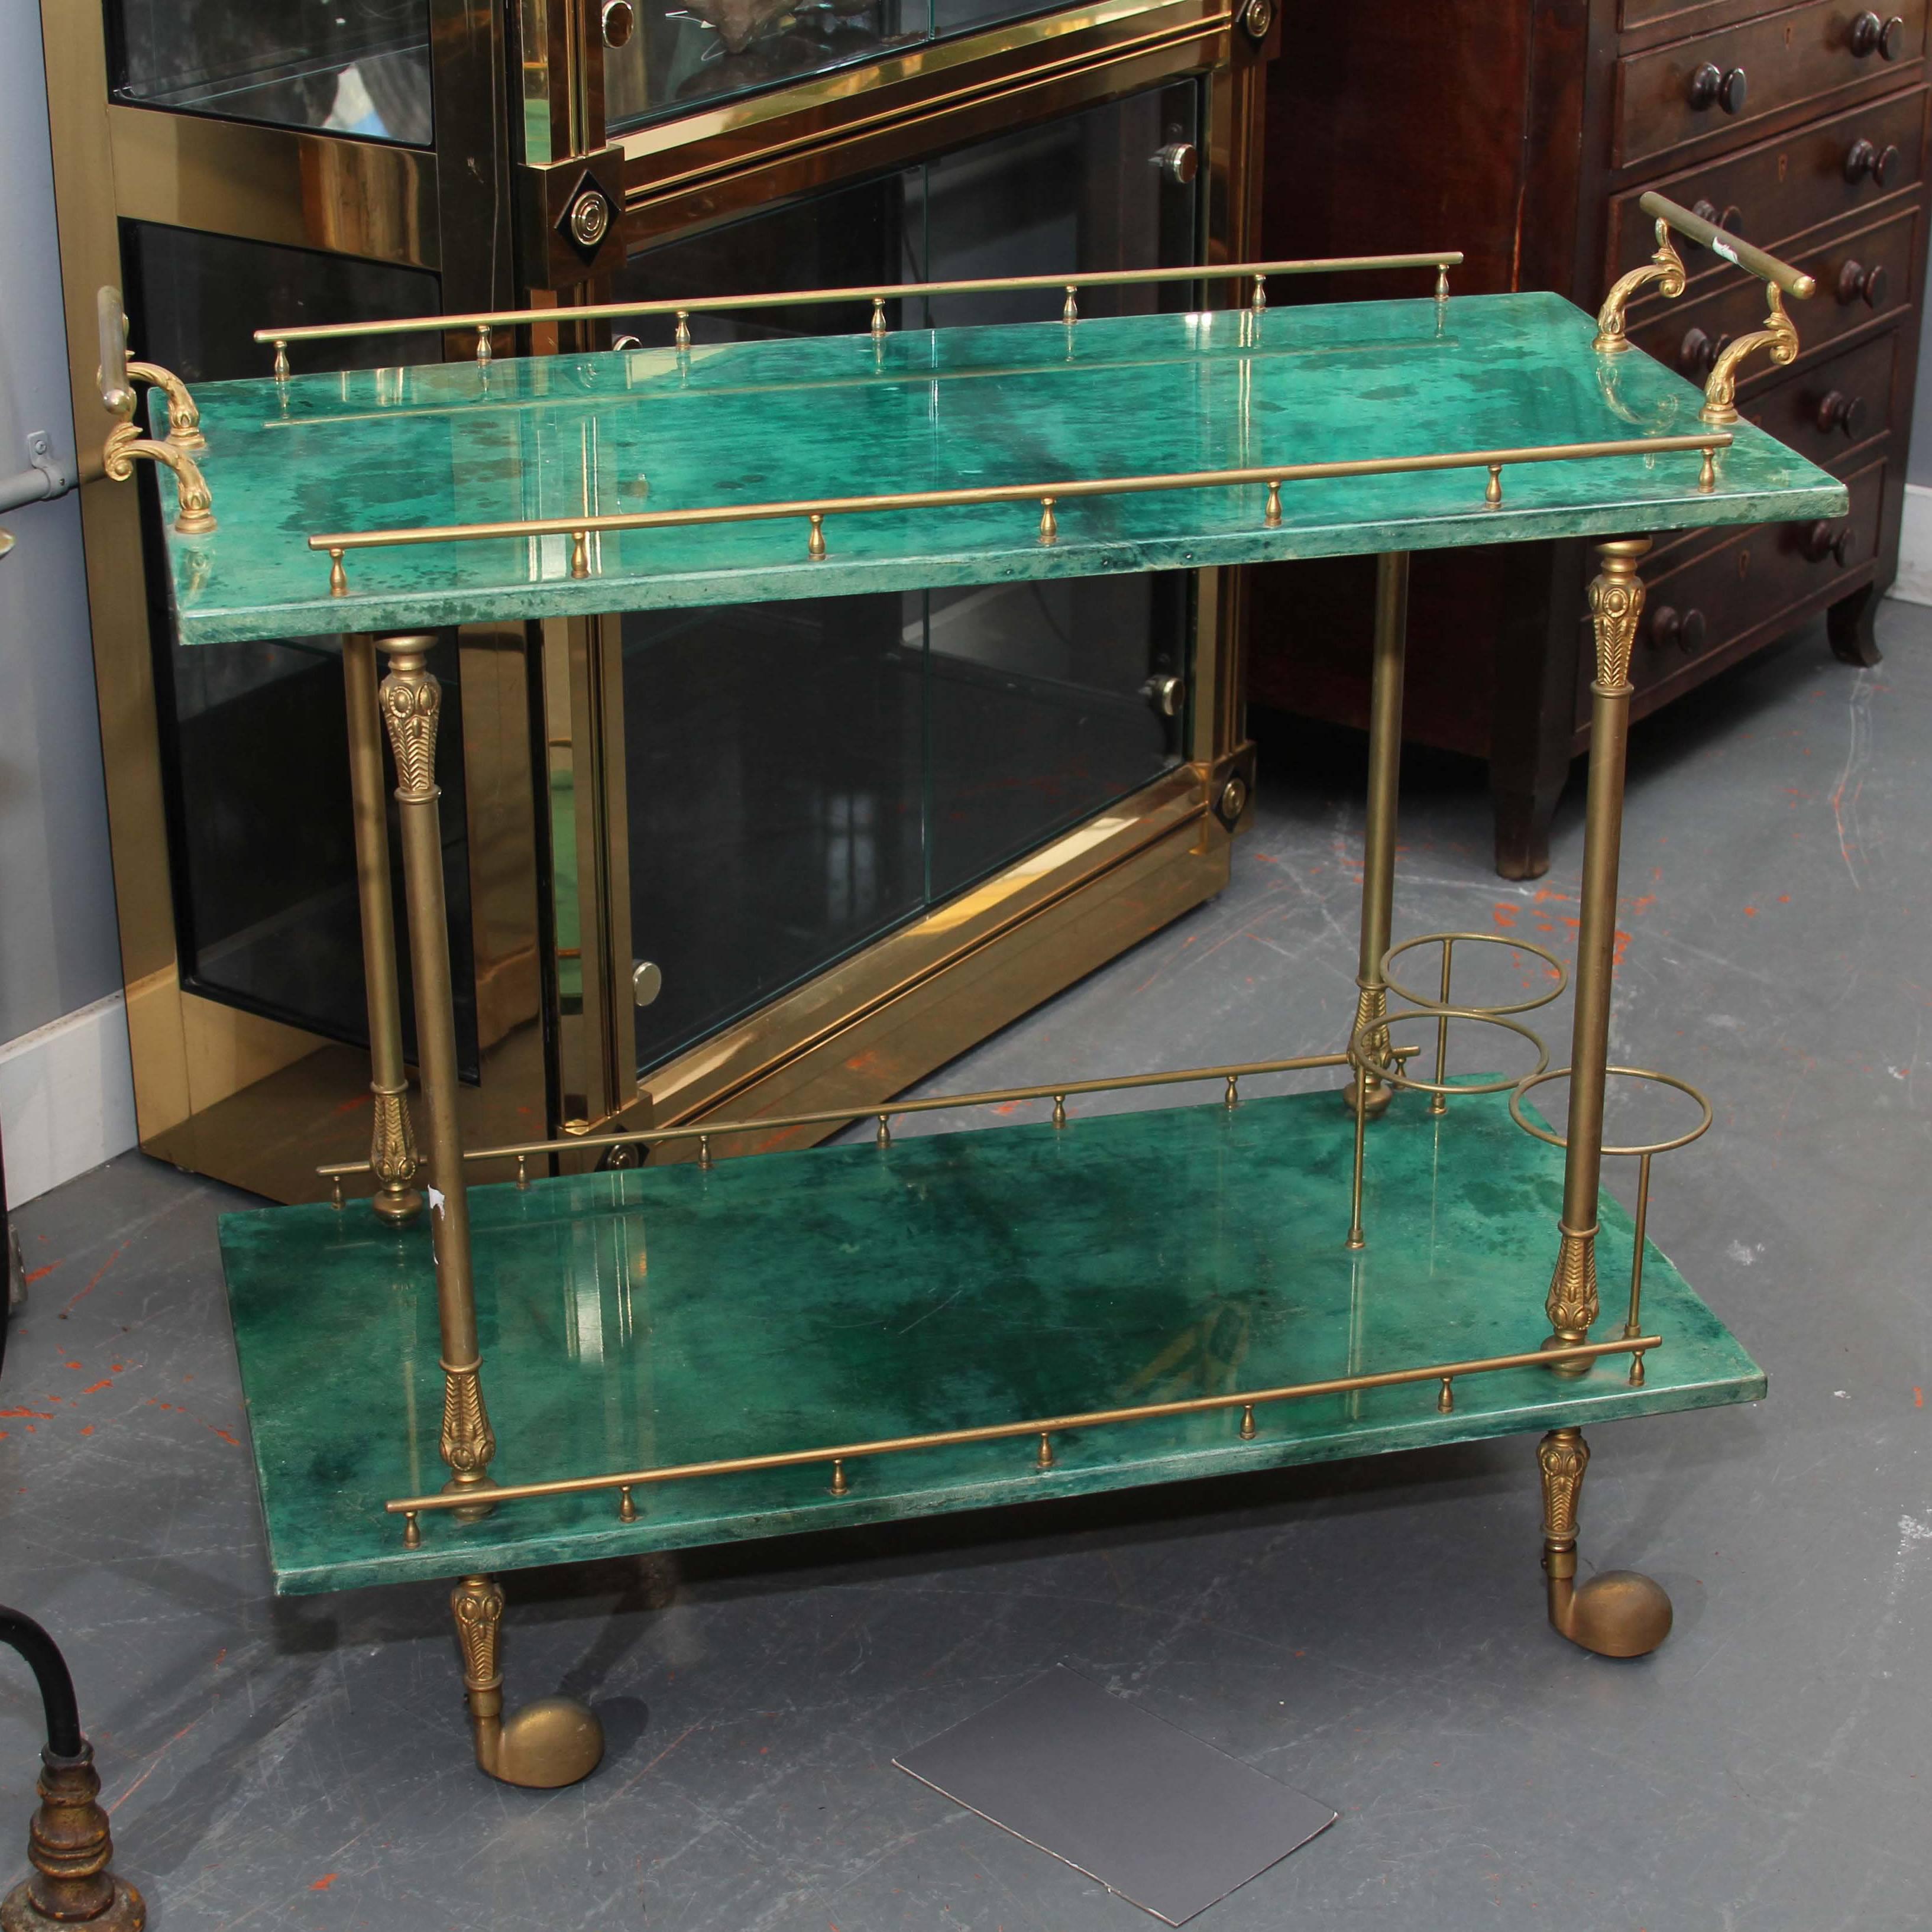 Two-tier bar cart in lacquered emerald green goatskin with brass detail including handles and top and bottom fencing with circular bottle holders, Italy.